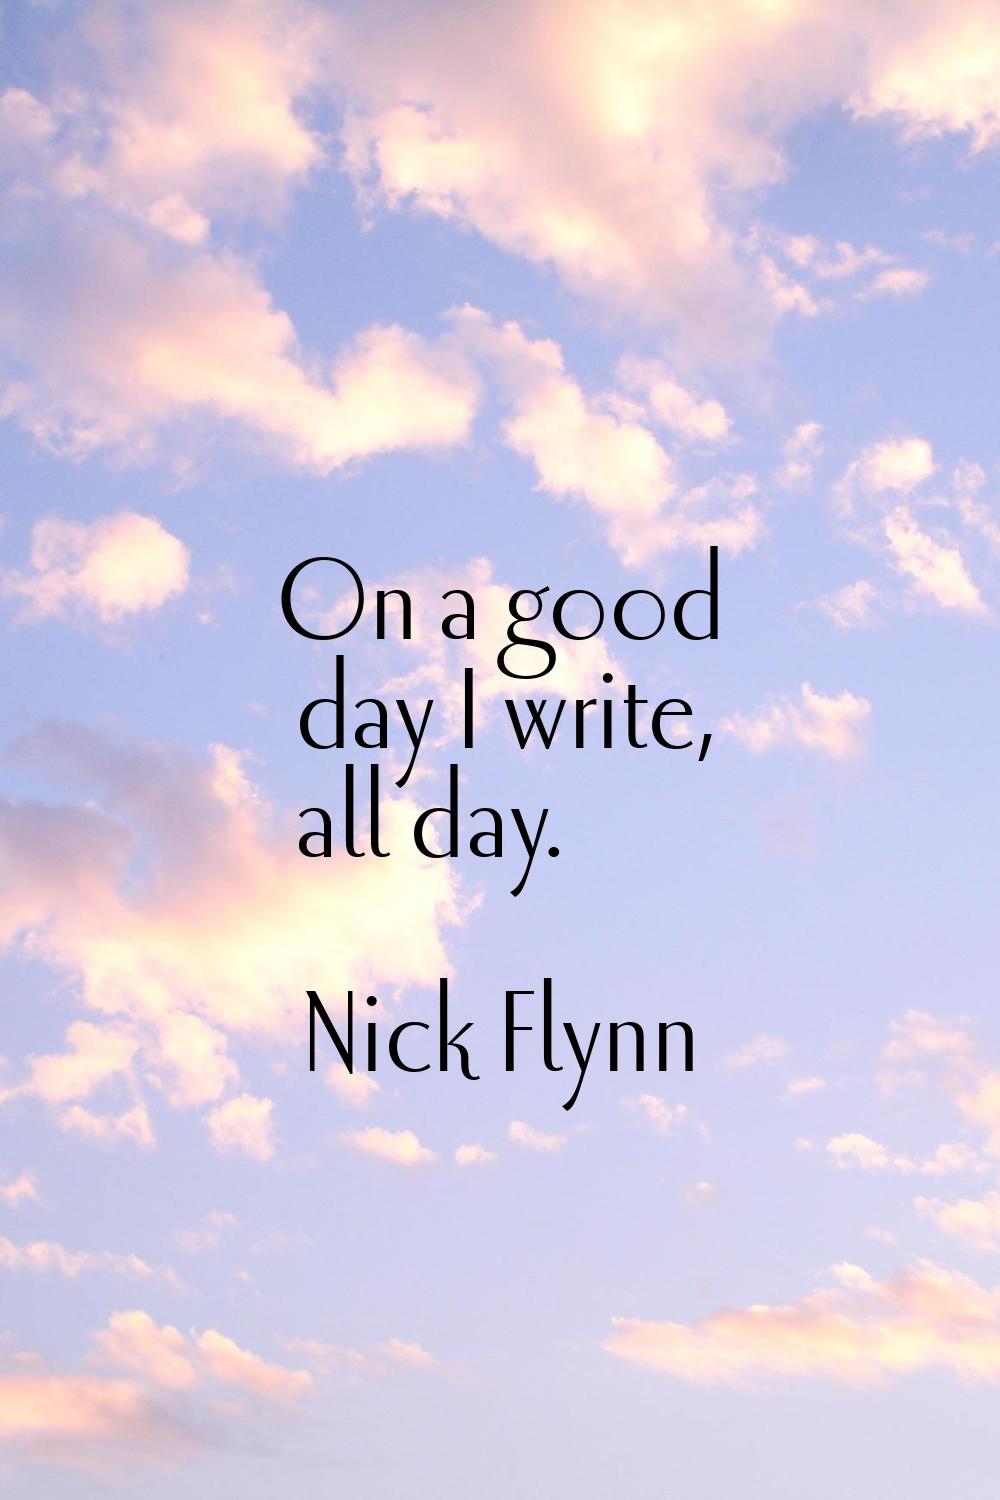 On a good day I write, all day.